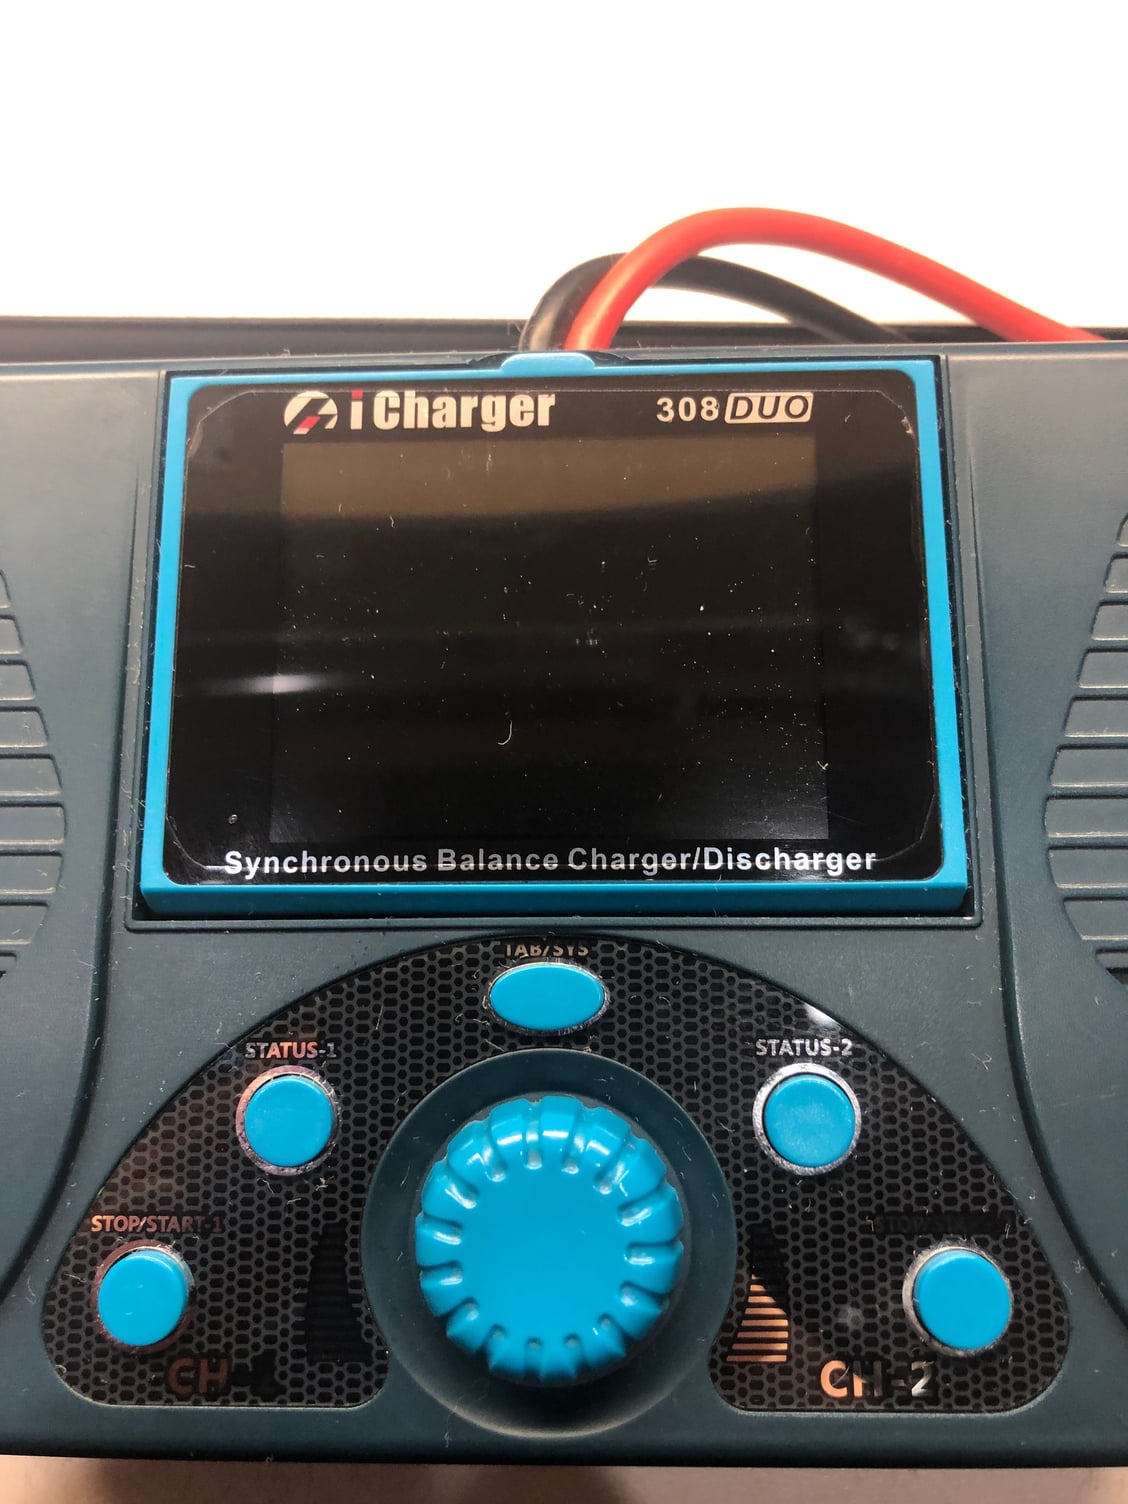 iCharger 308 DUO - R/C Tech Forums